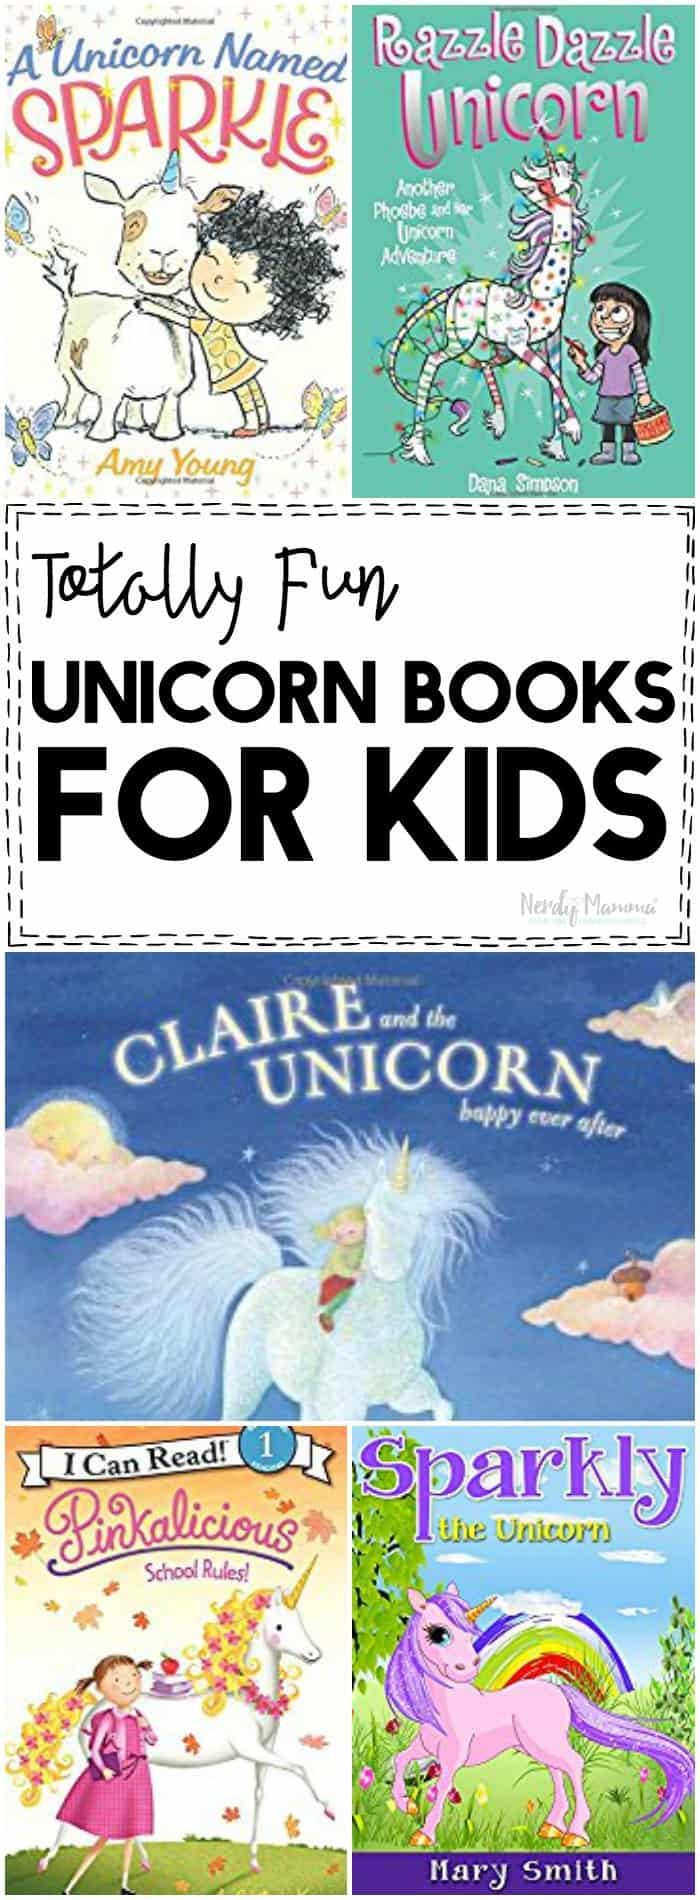 OMG! These unicorn books for kids are ADORABLE!